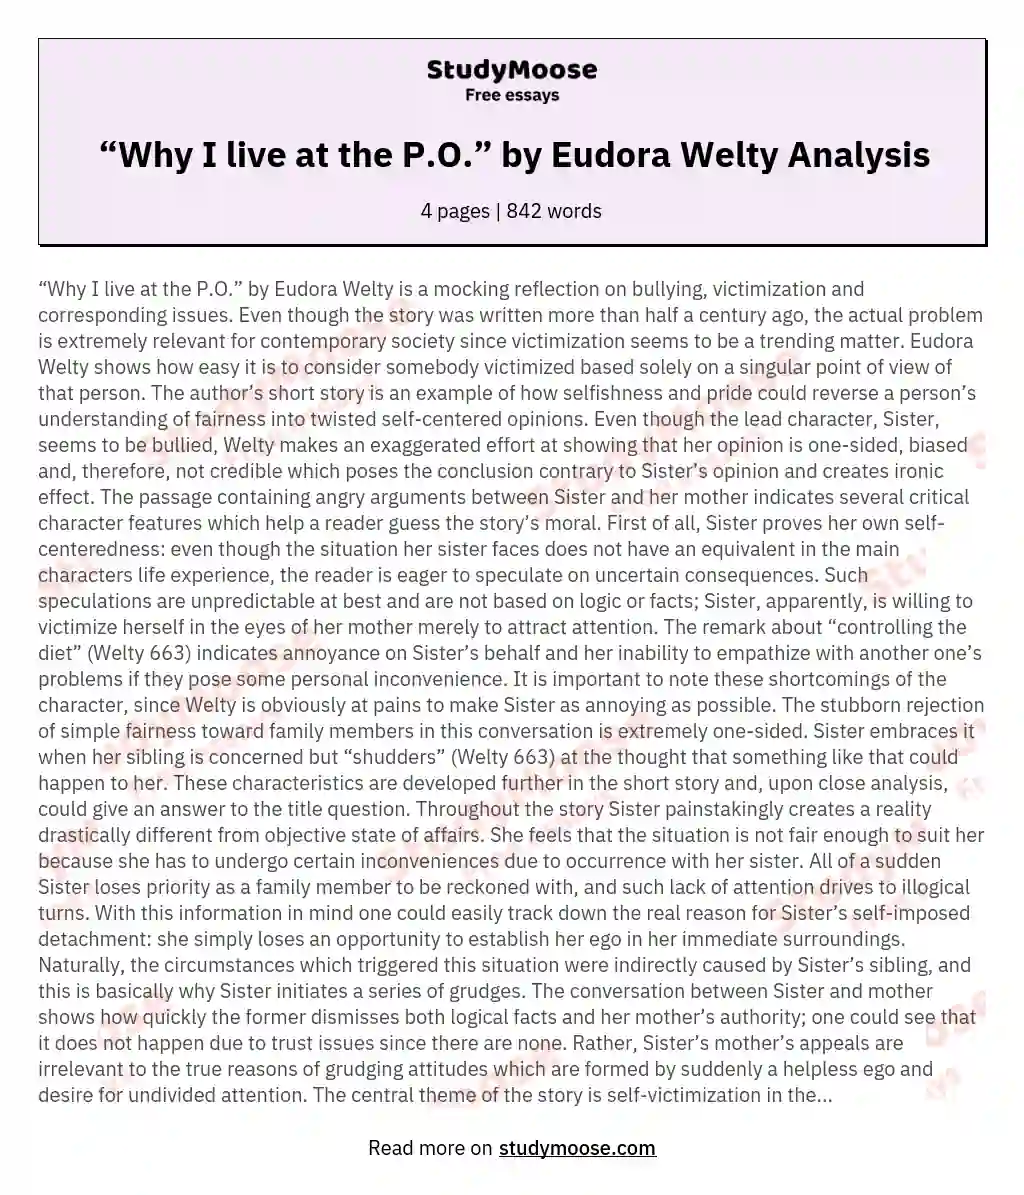 “Why I live at the P.O.” by Eudora Welty Analysis essay